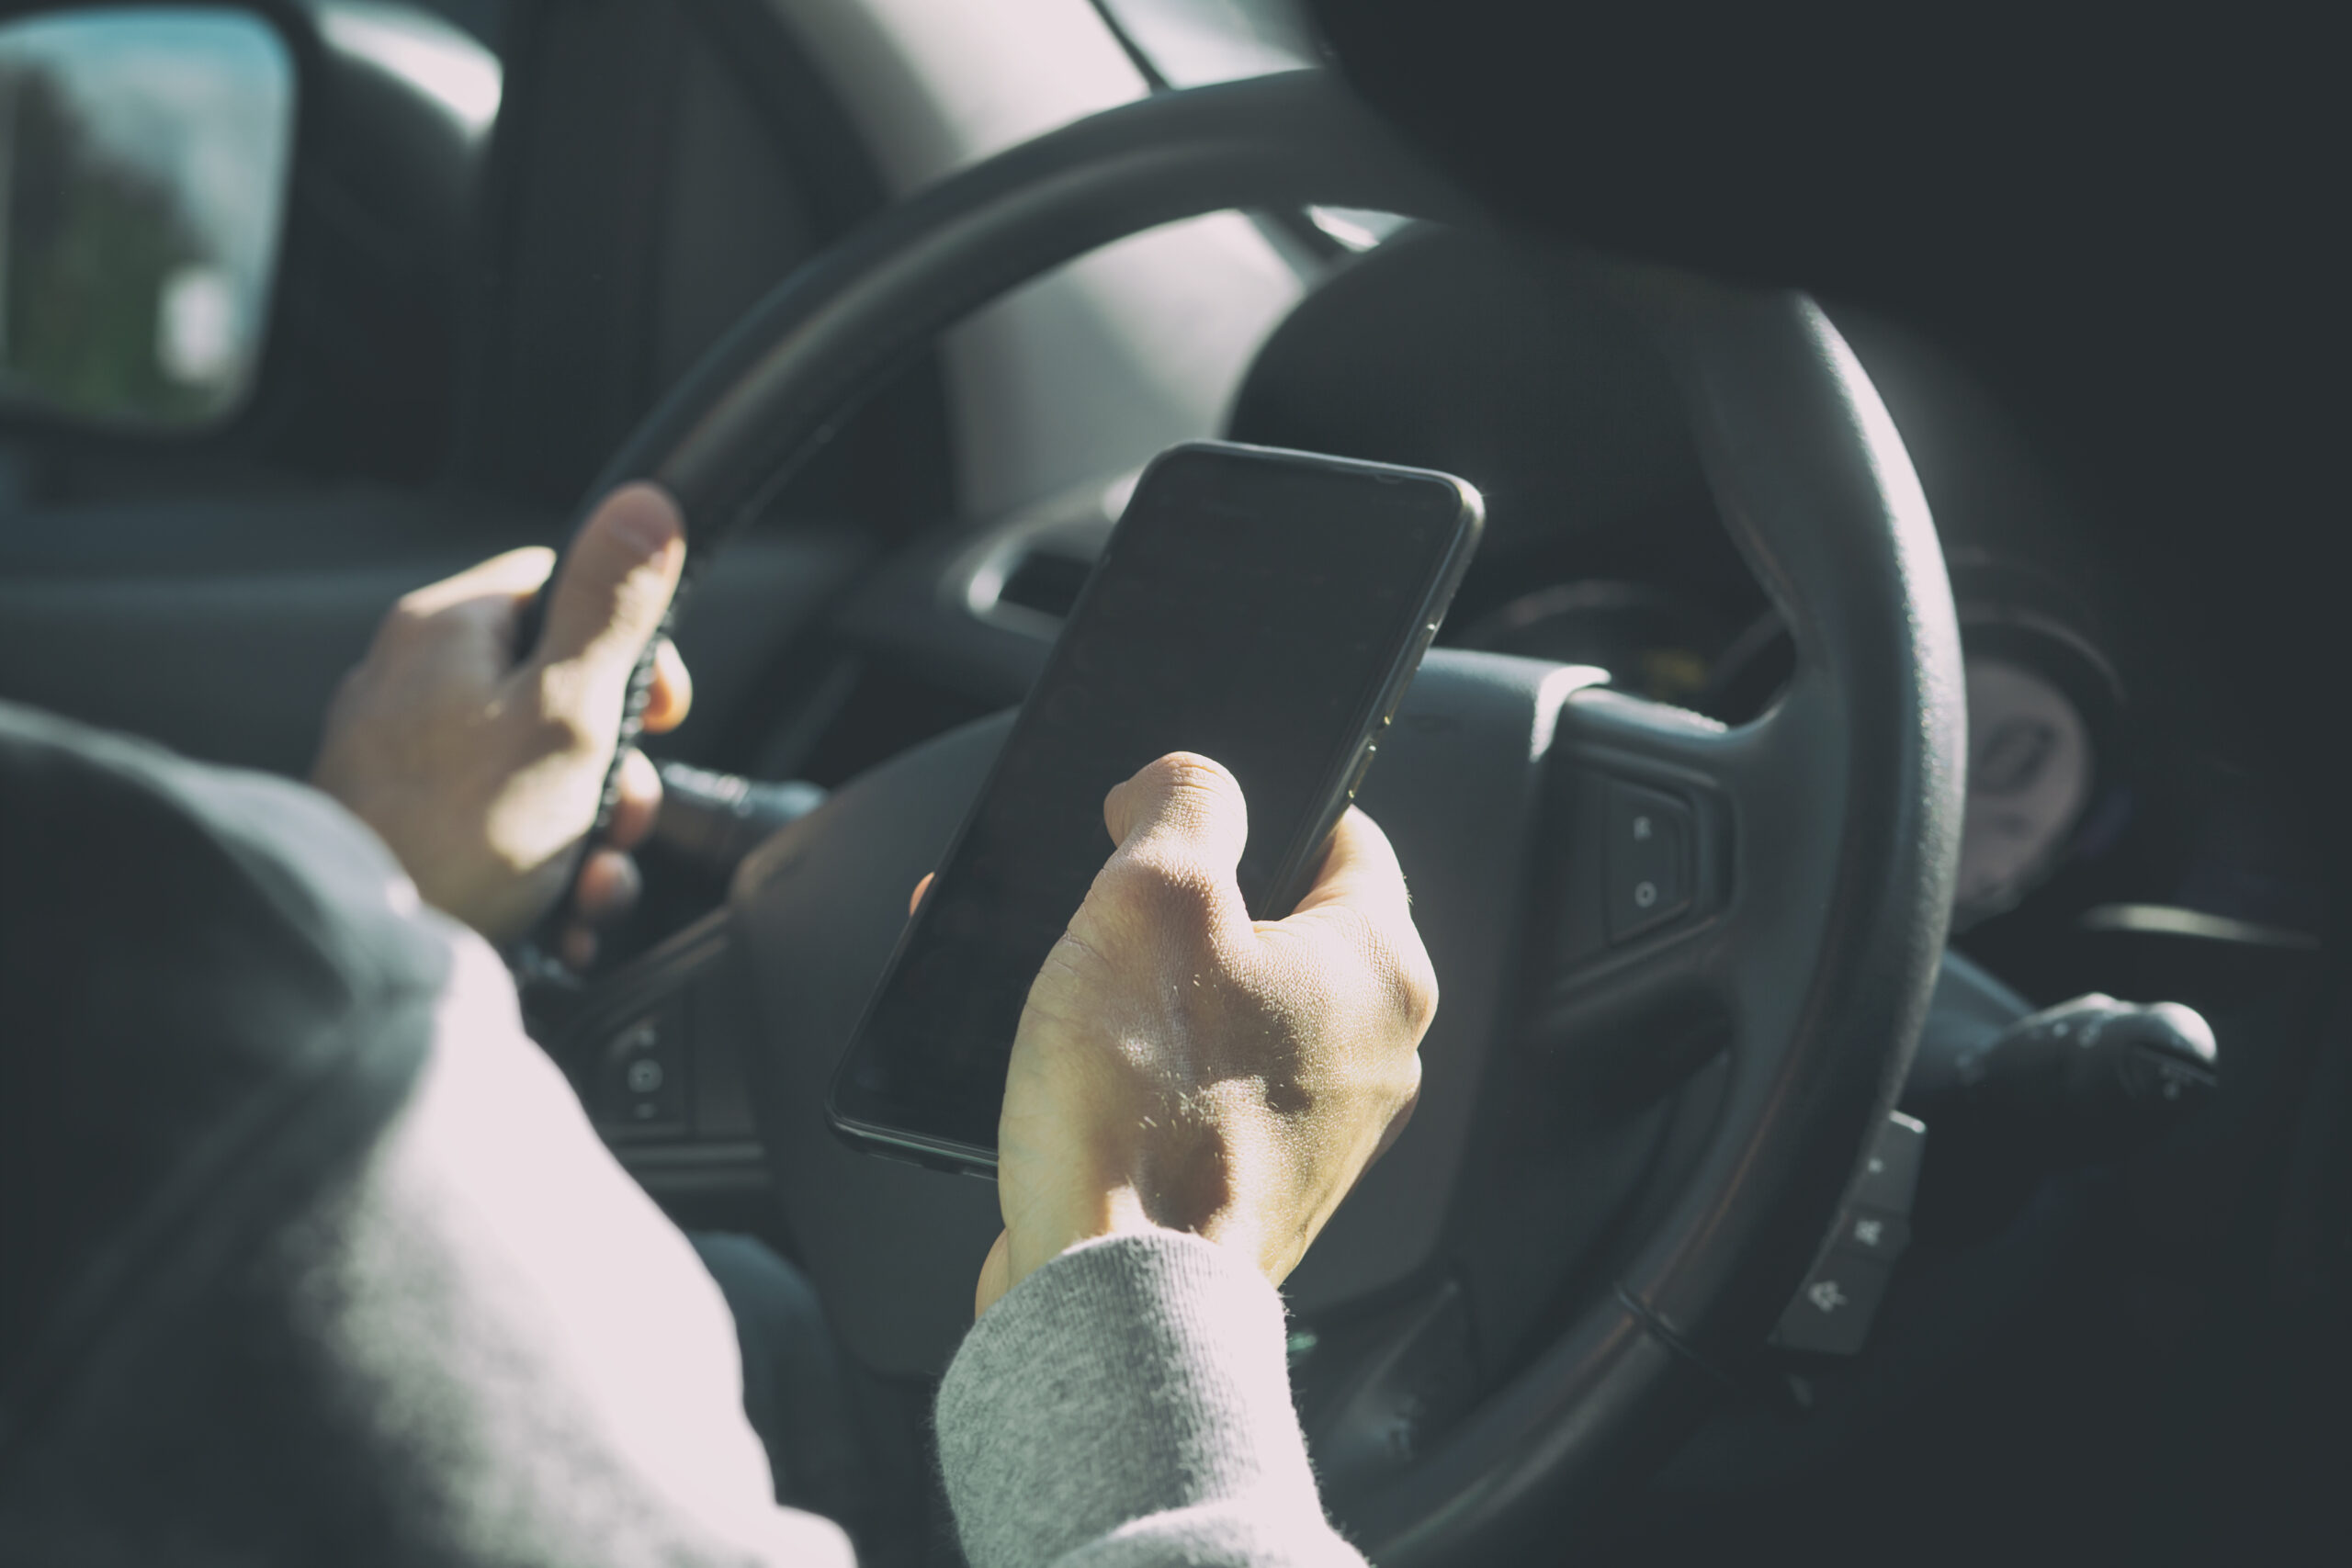 Driver holding a cell phone while driving distracted.